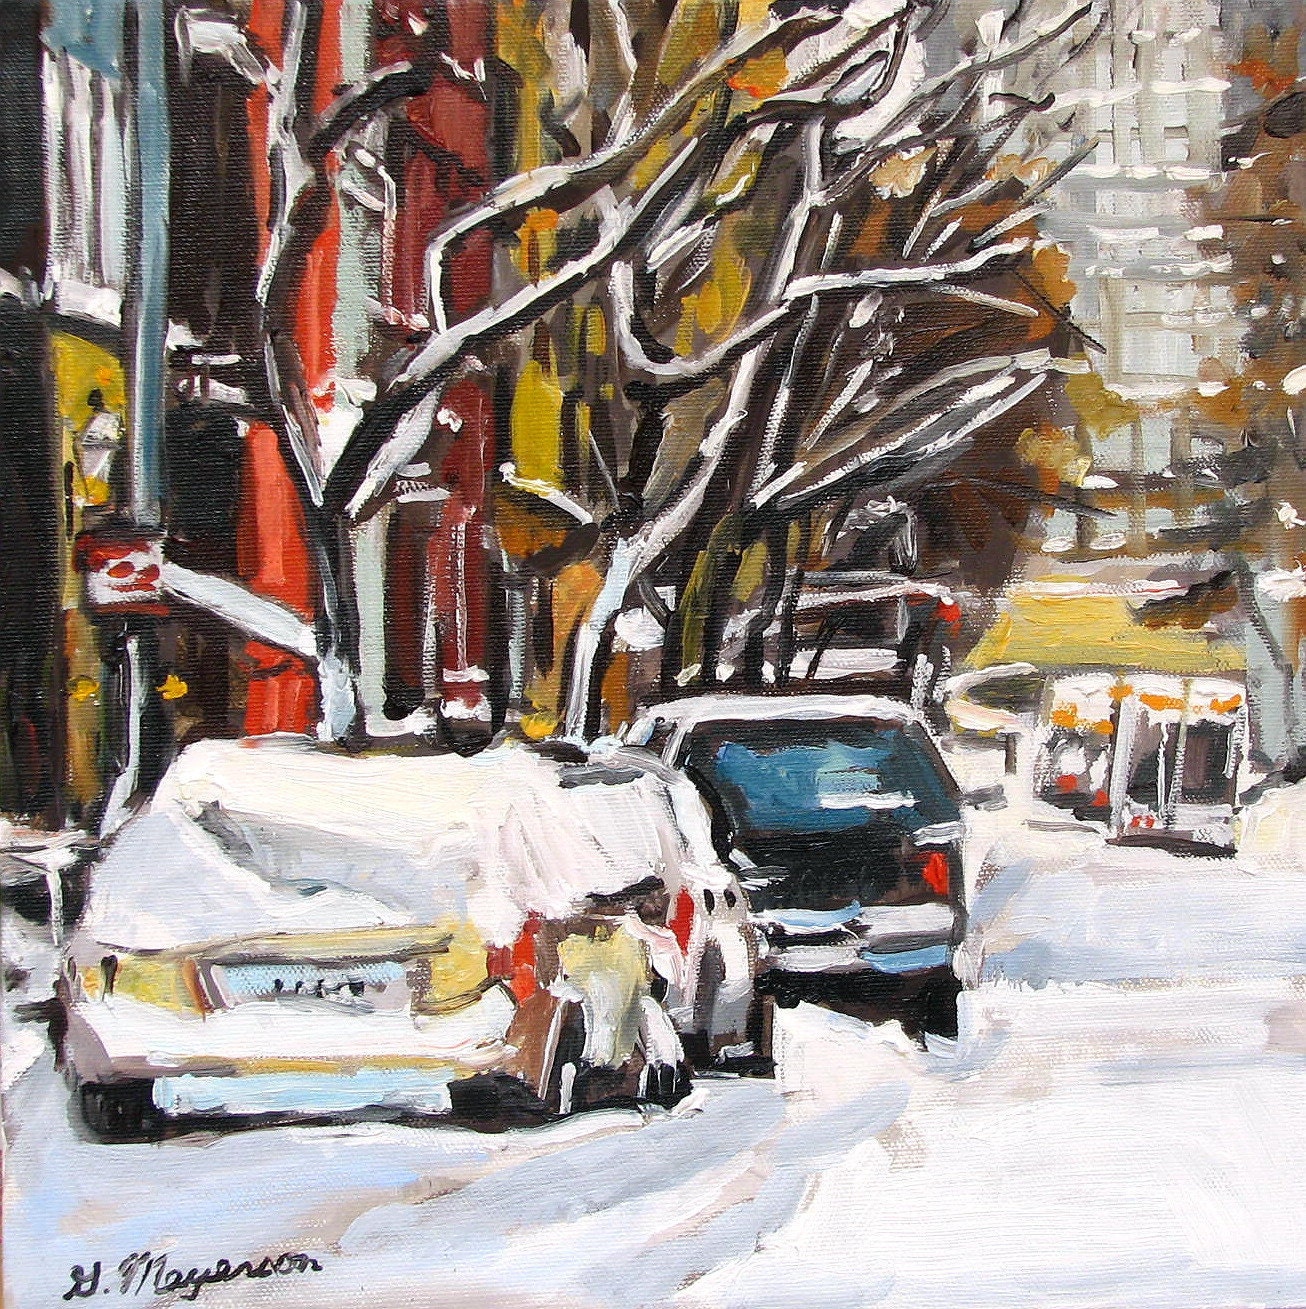 Winter Fine Art Print Cityscape Painting 8x8, City In Snow, Painting by Gwen Meyerson